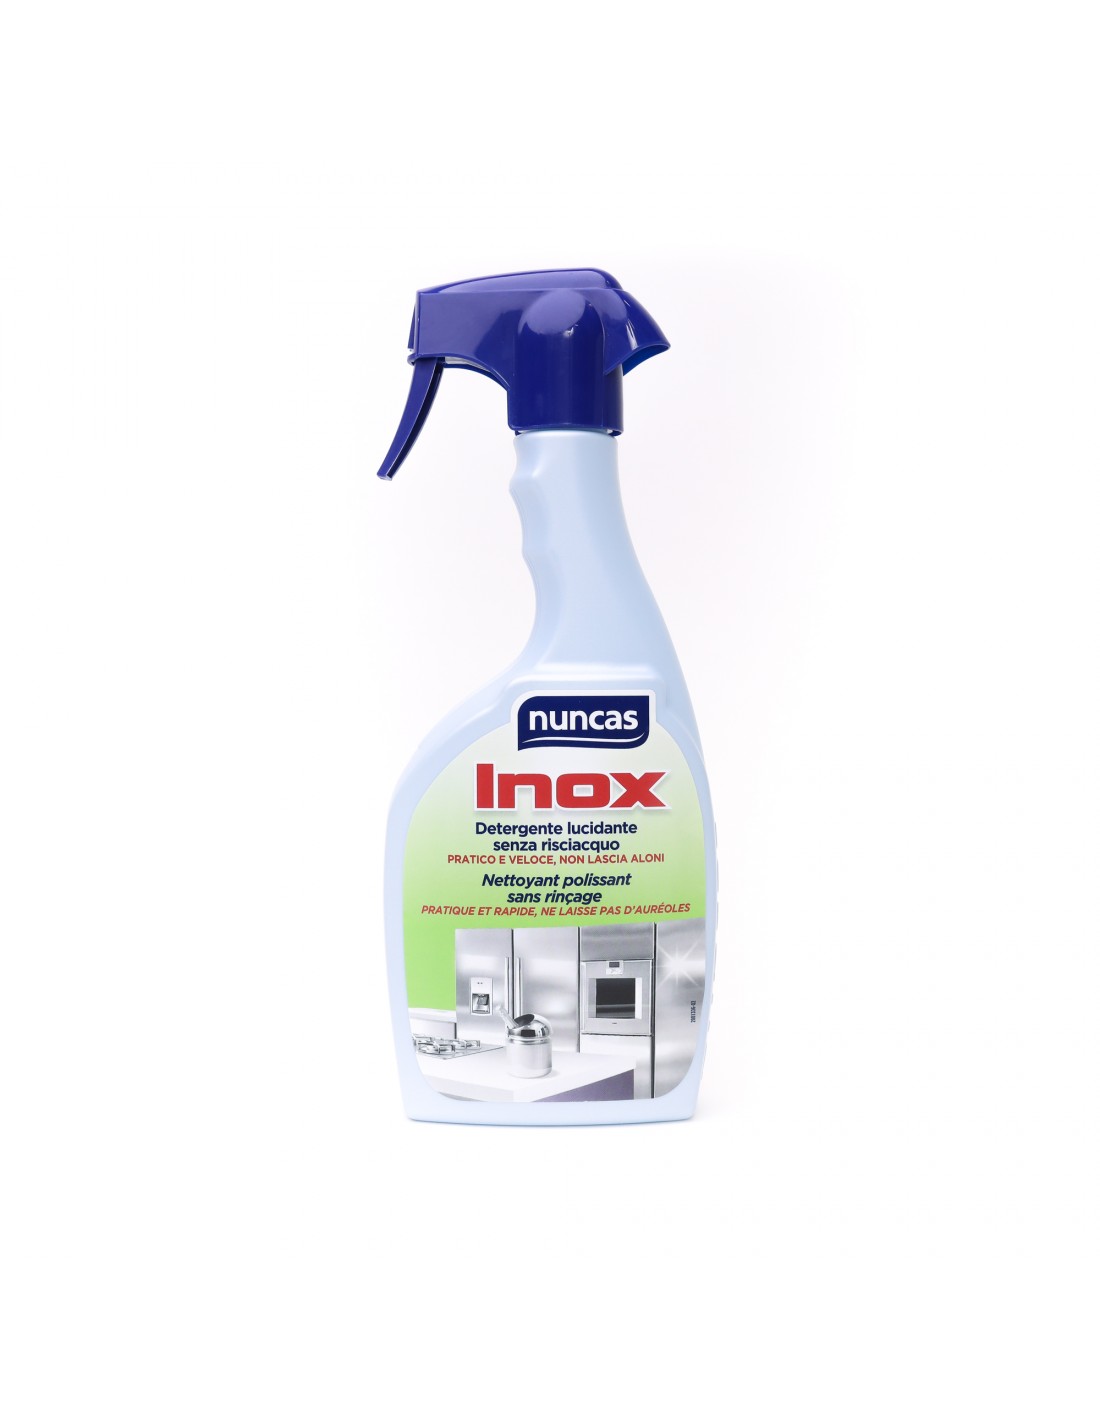 Nuncas Polishing detergent for stainless steel surfaces without